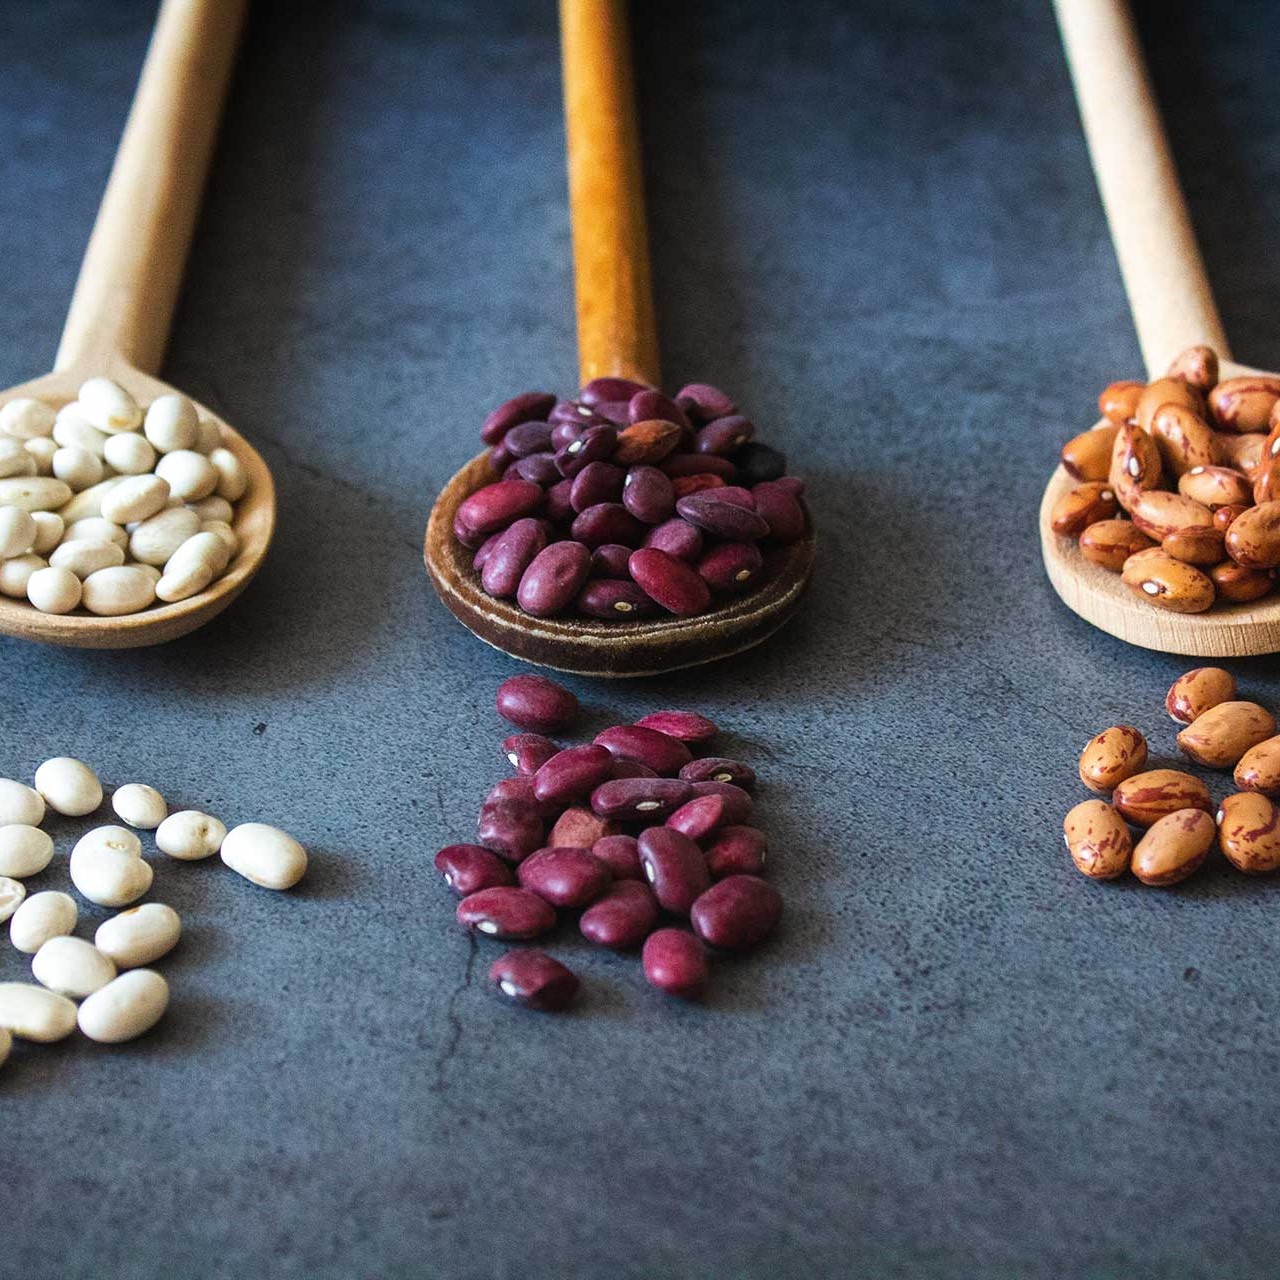 Three types of beans. White, red and brown.